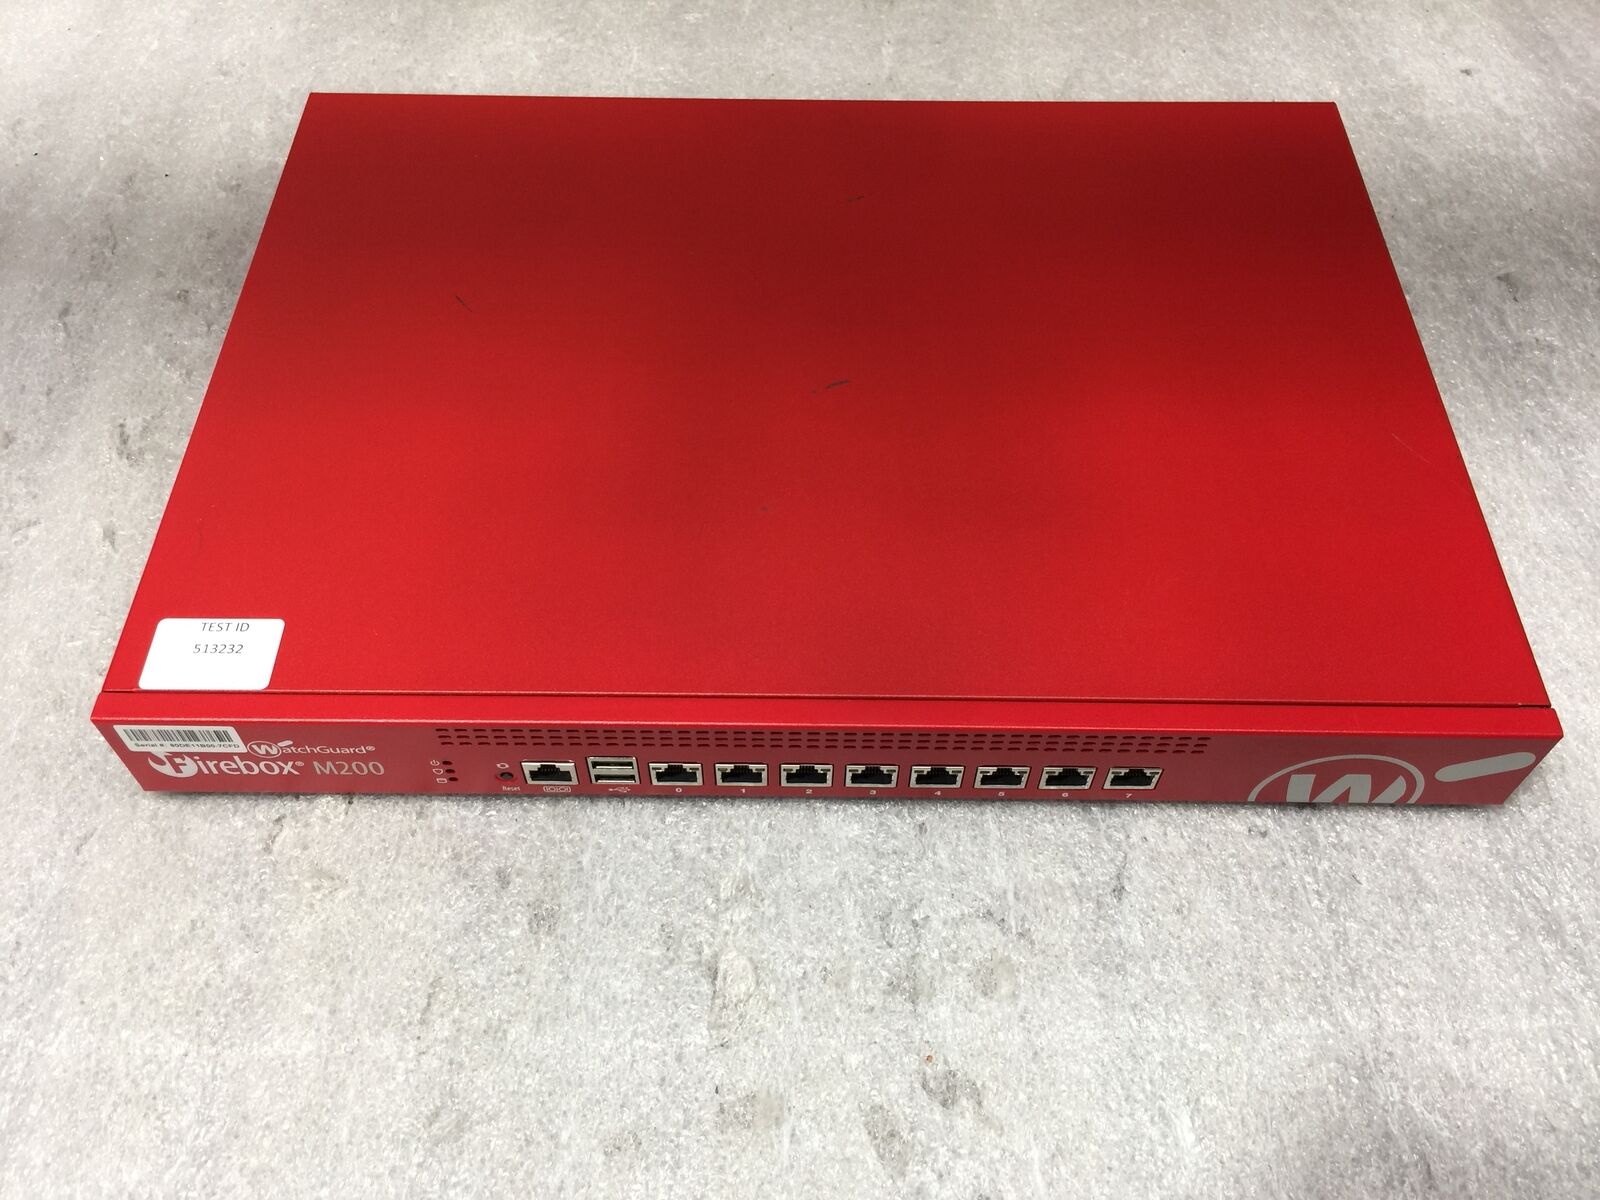 WatchGuard Firebox M200 Network Security Appliance Firewall, Tested and Reset